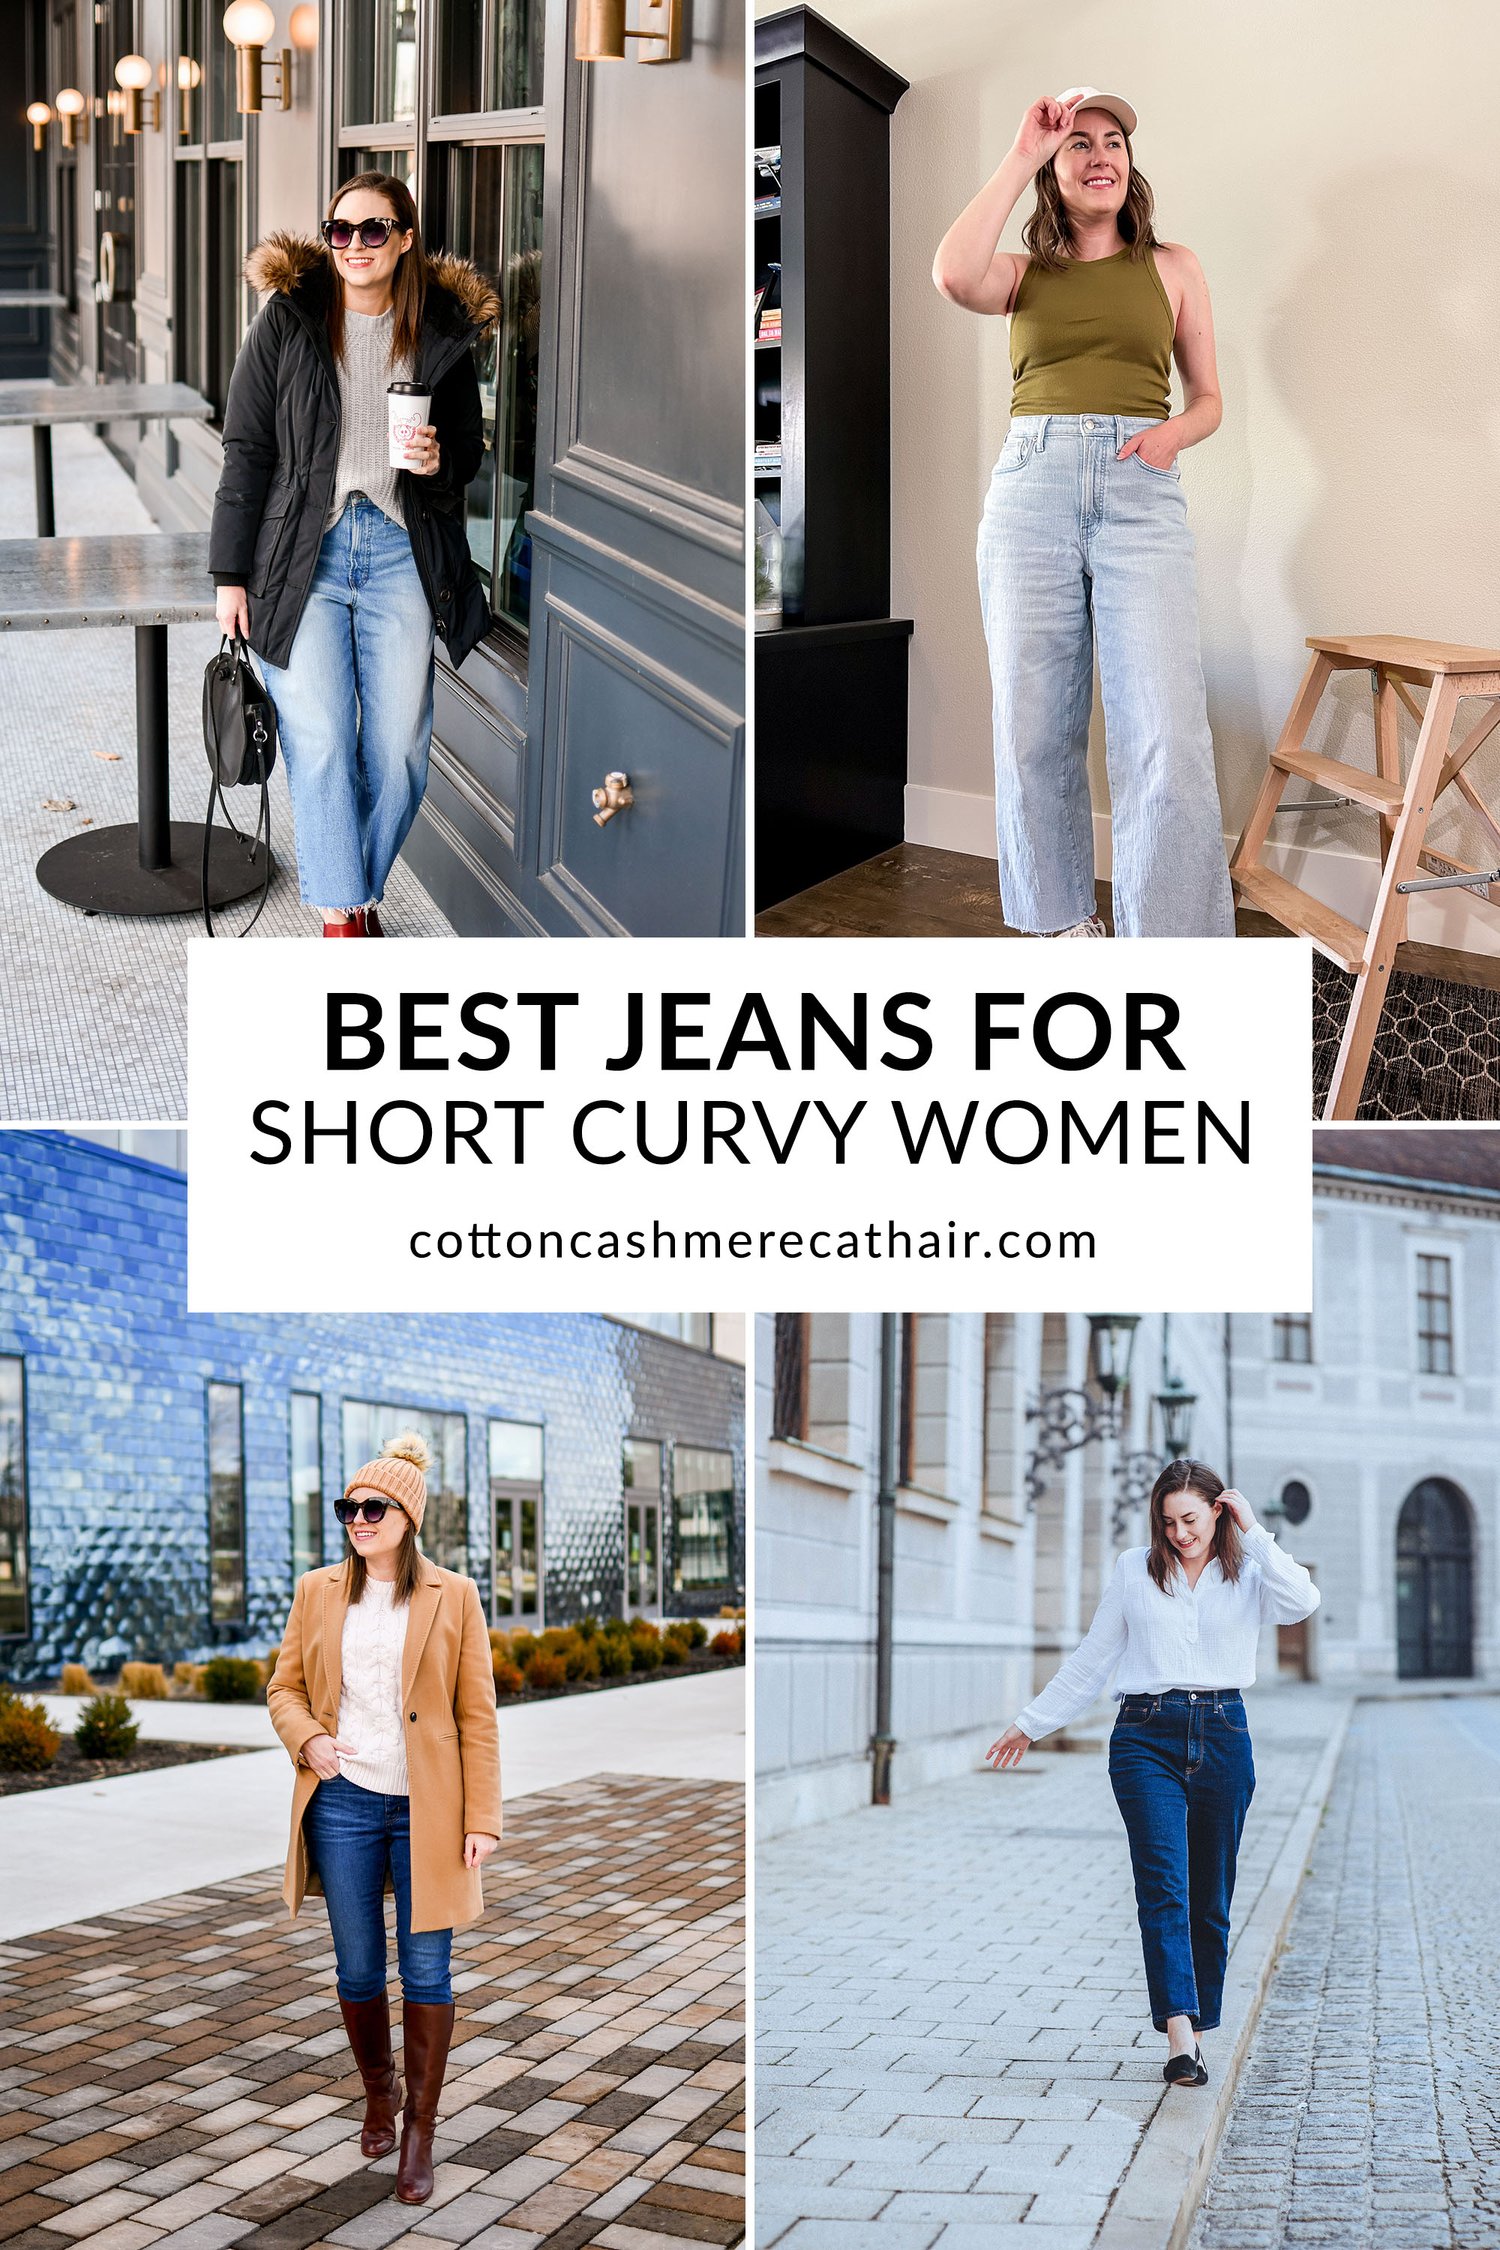 30 Best Jeans for Curvy Girls - Stylish and Durable